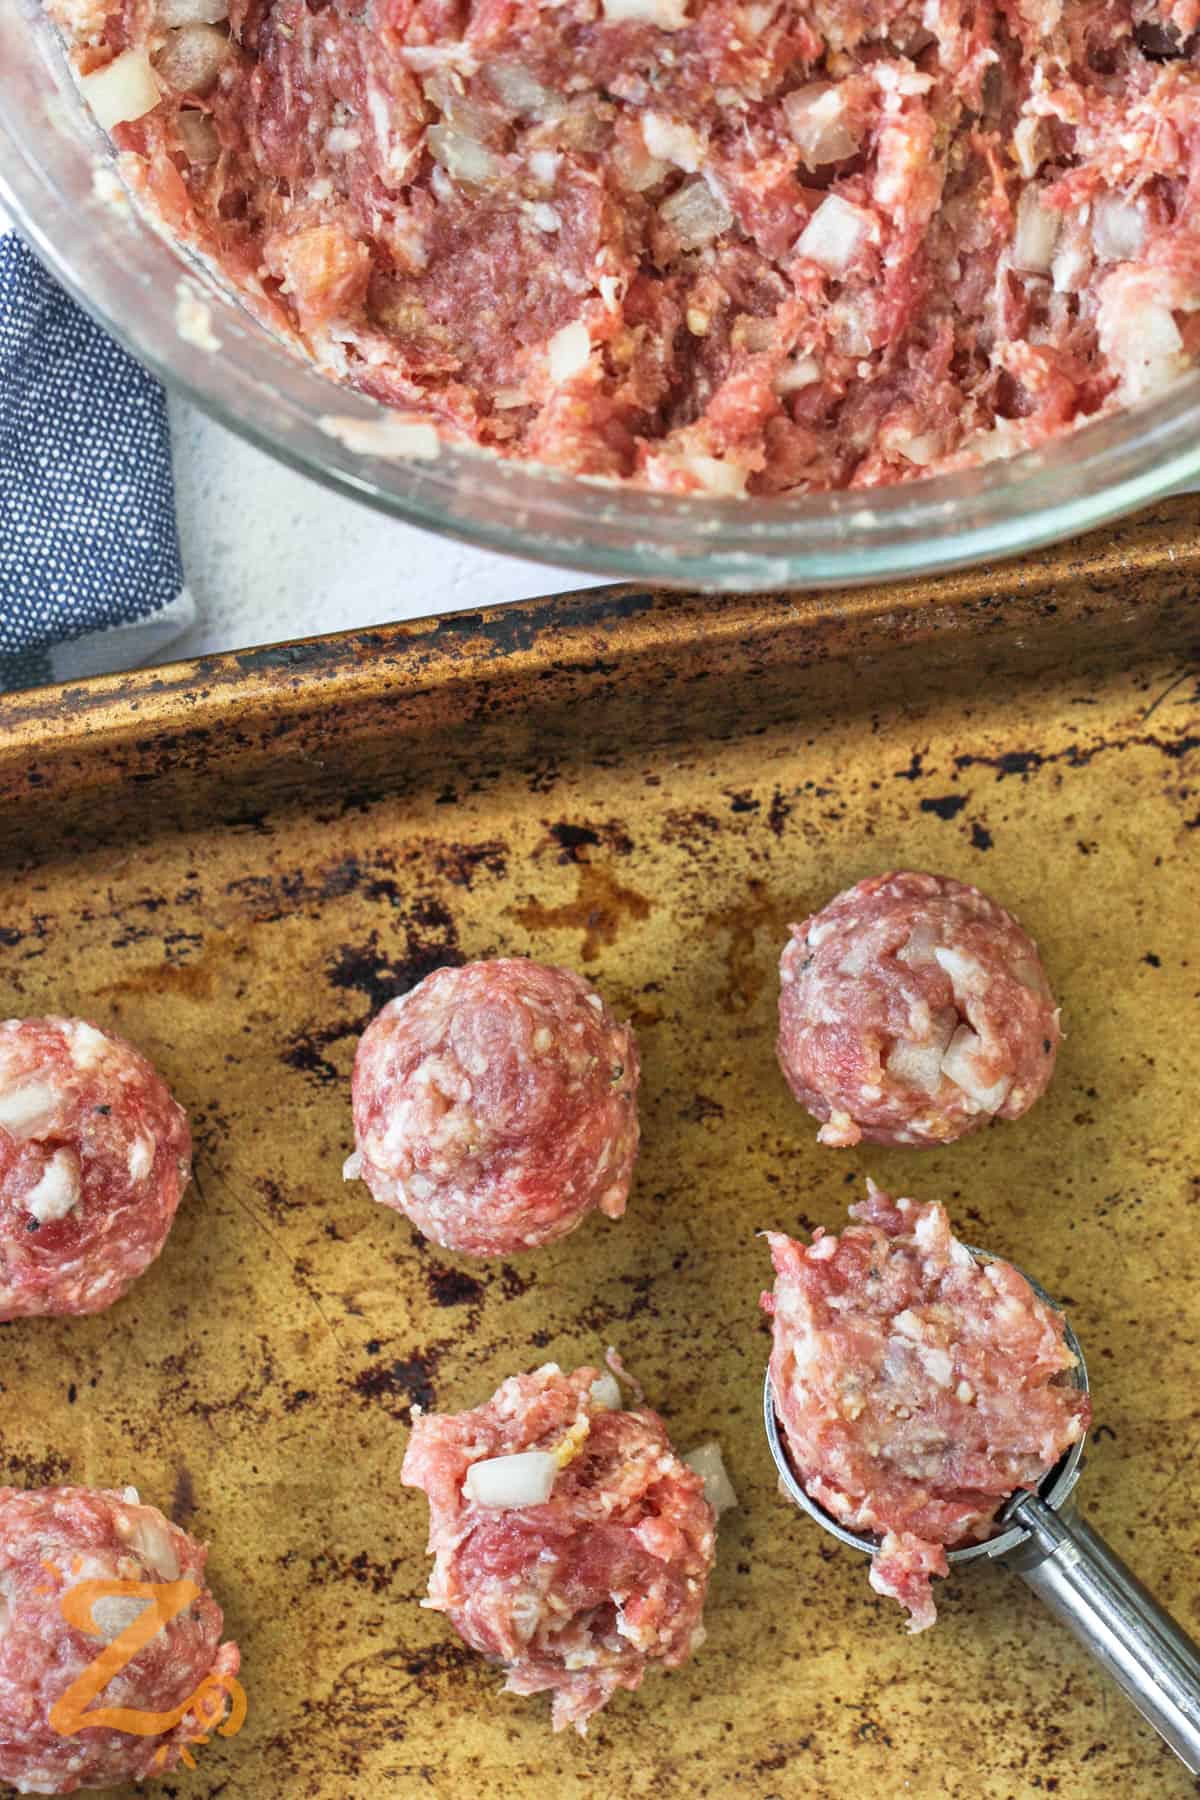 shaping Swedish Meatballs into balls before cooking